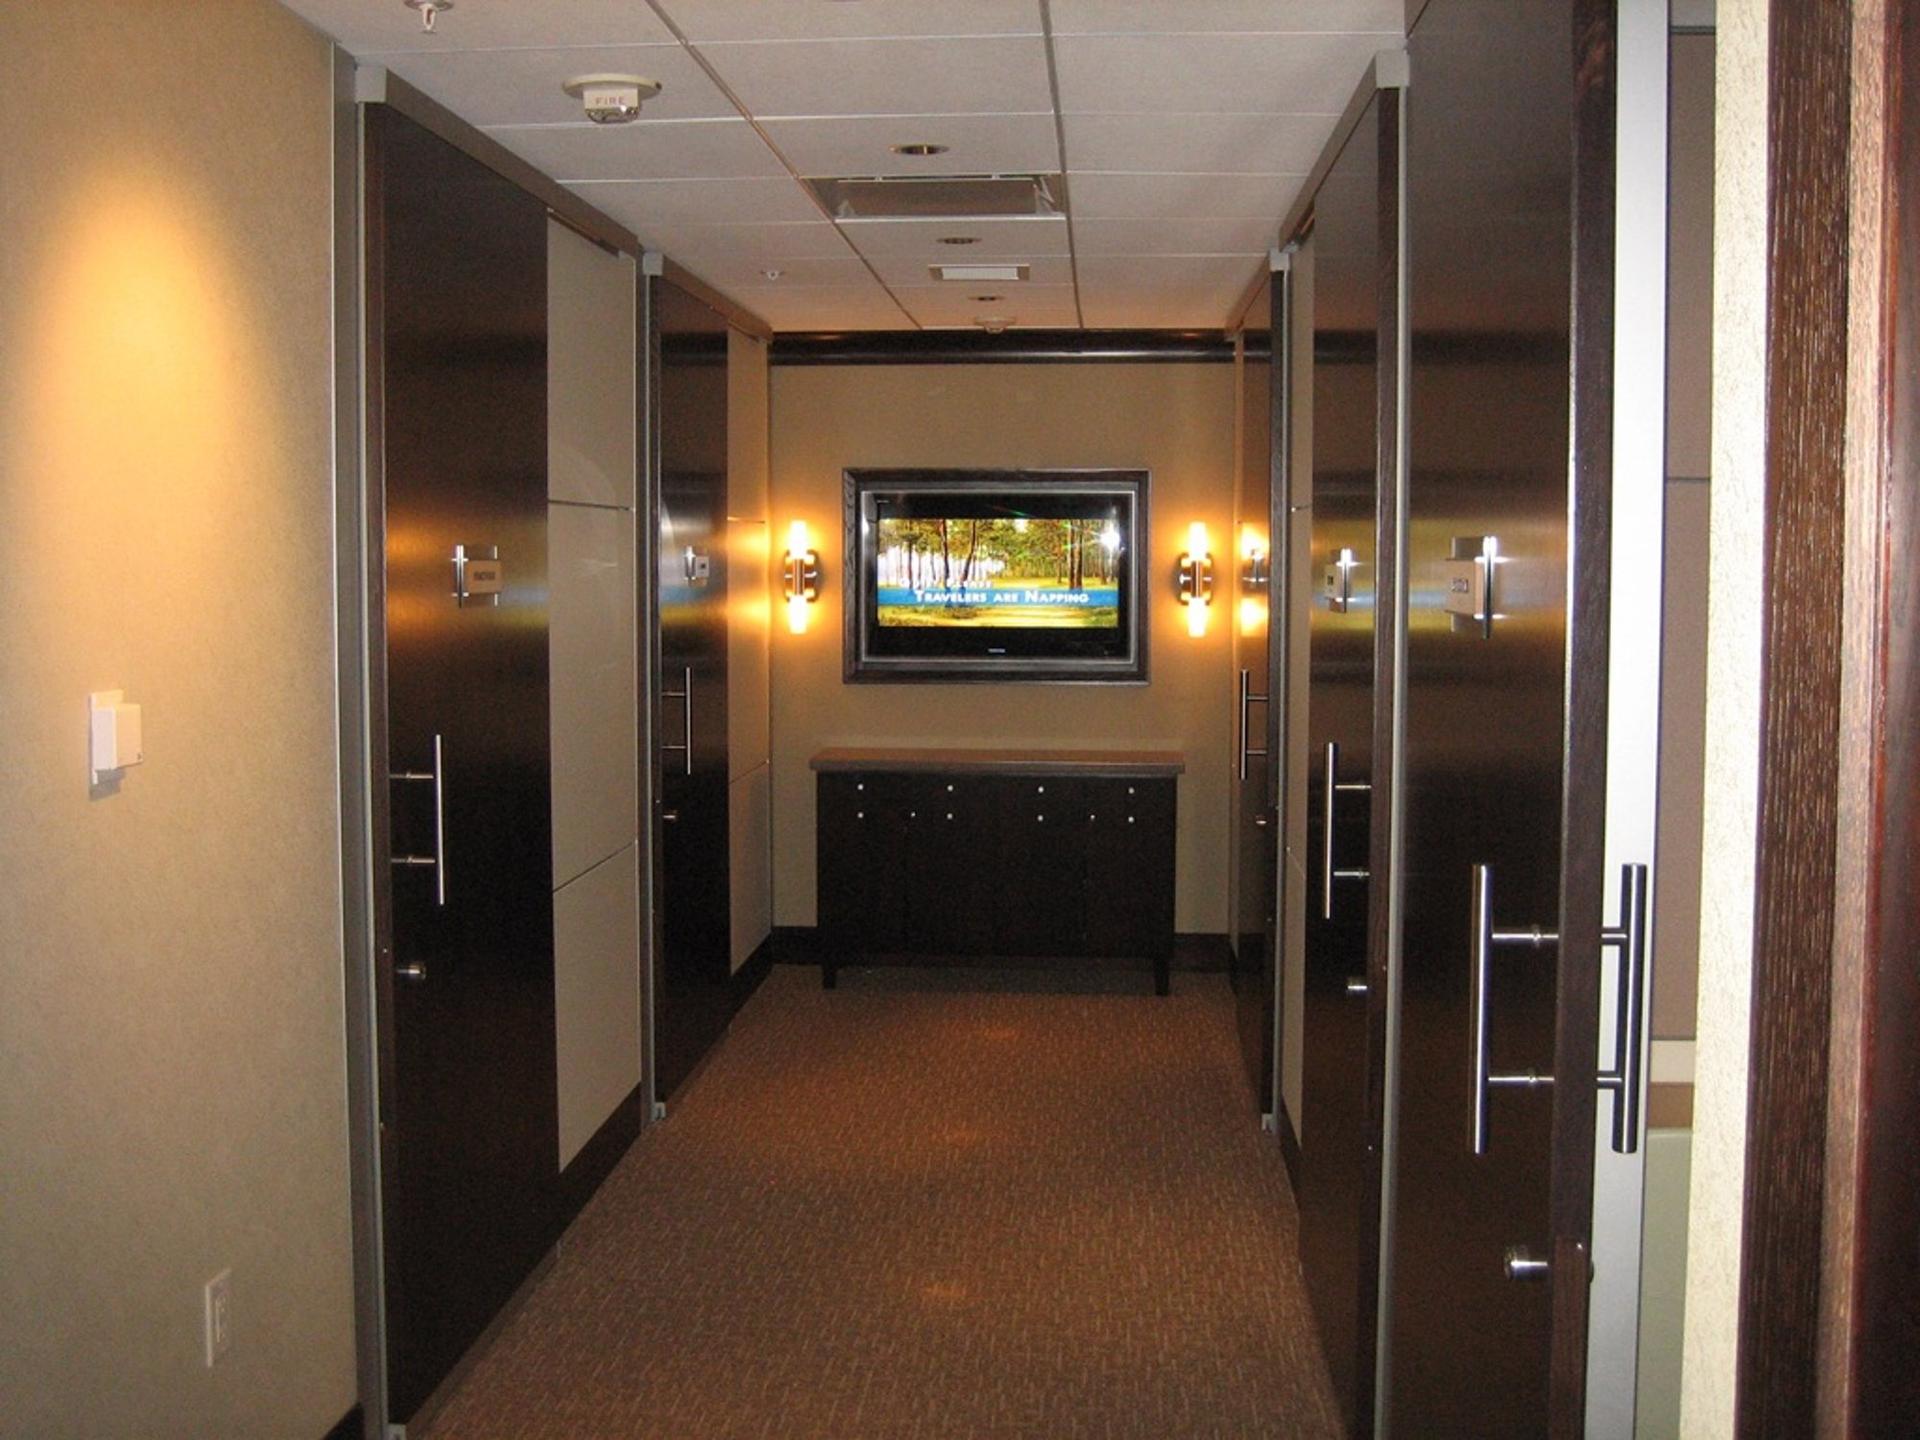 Minute Suites (Gate B15) image 9 of 19